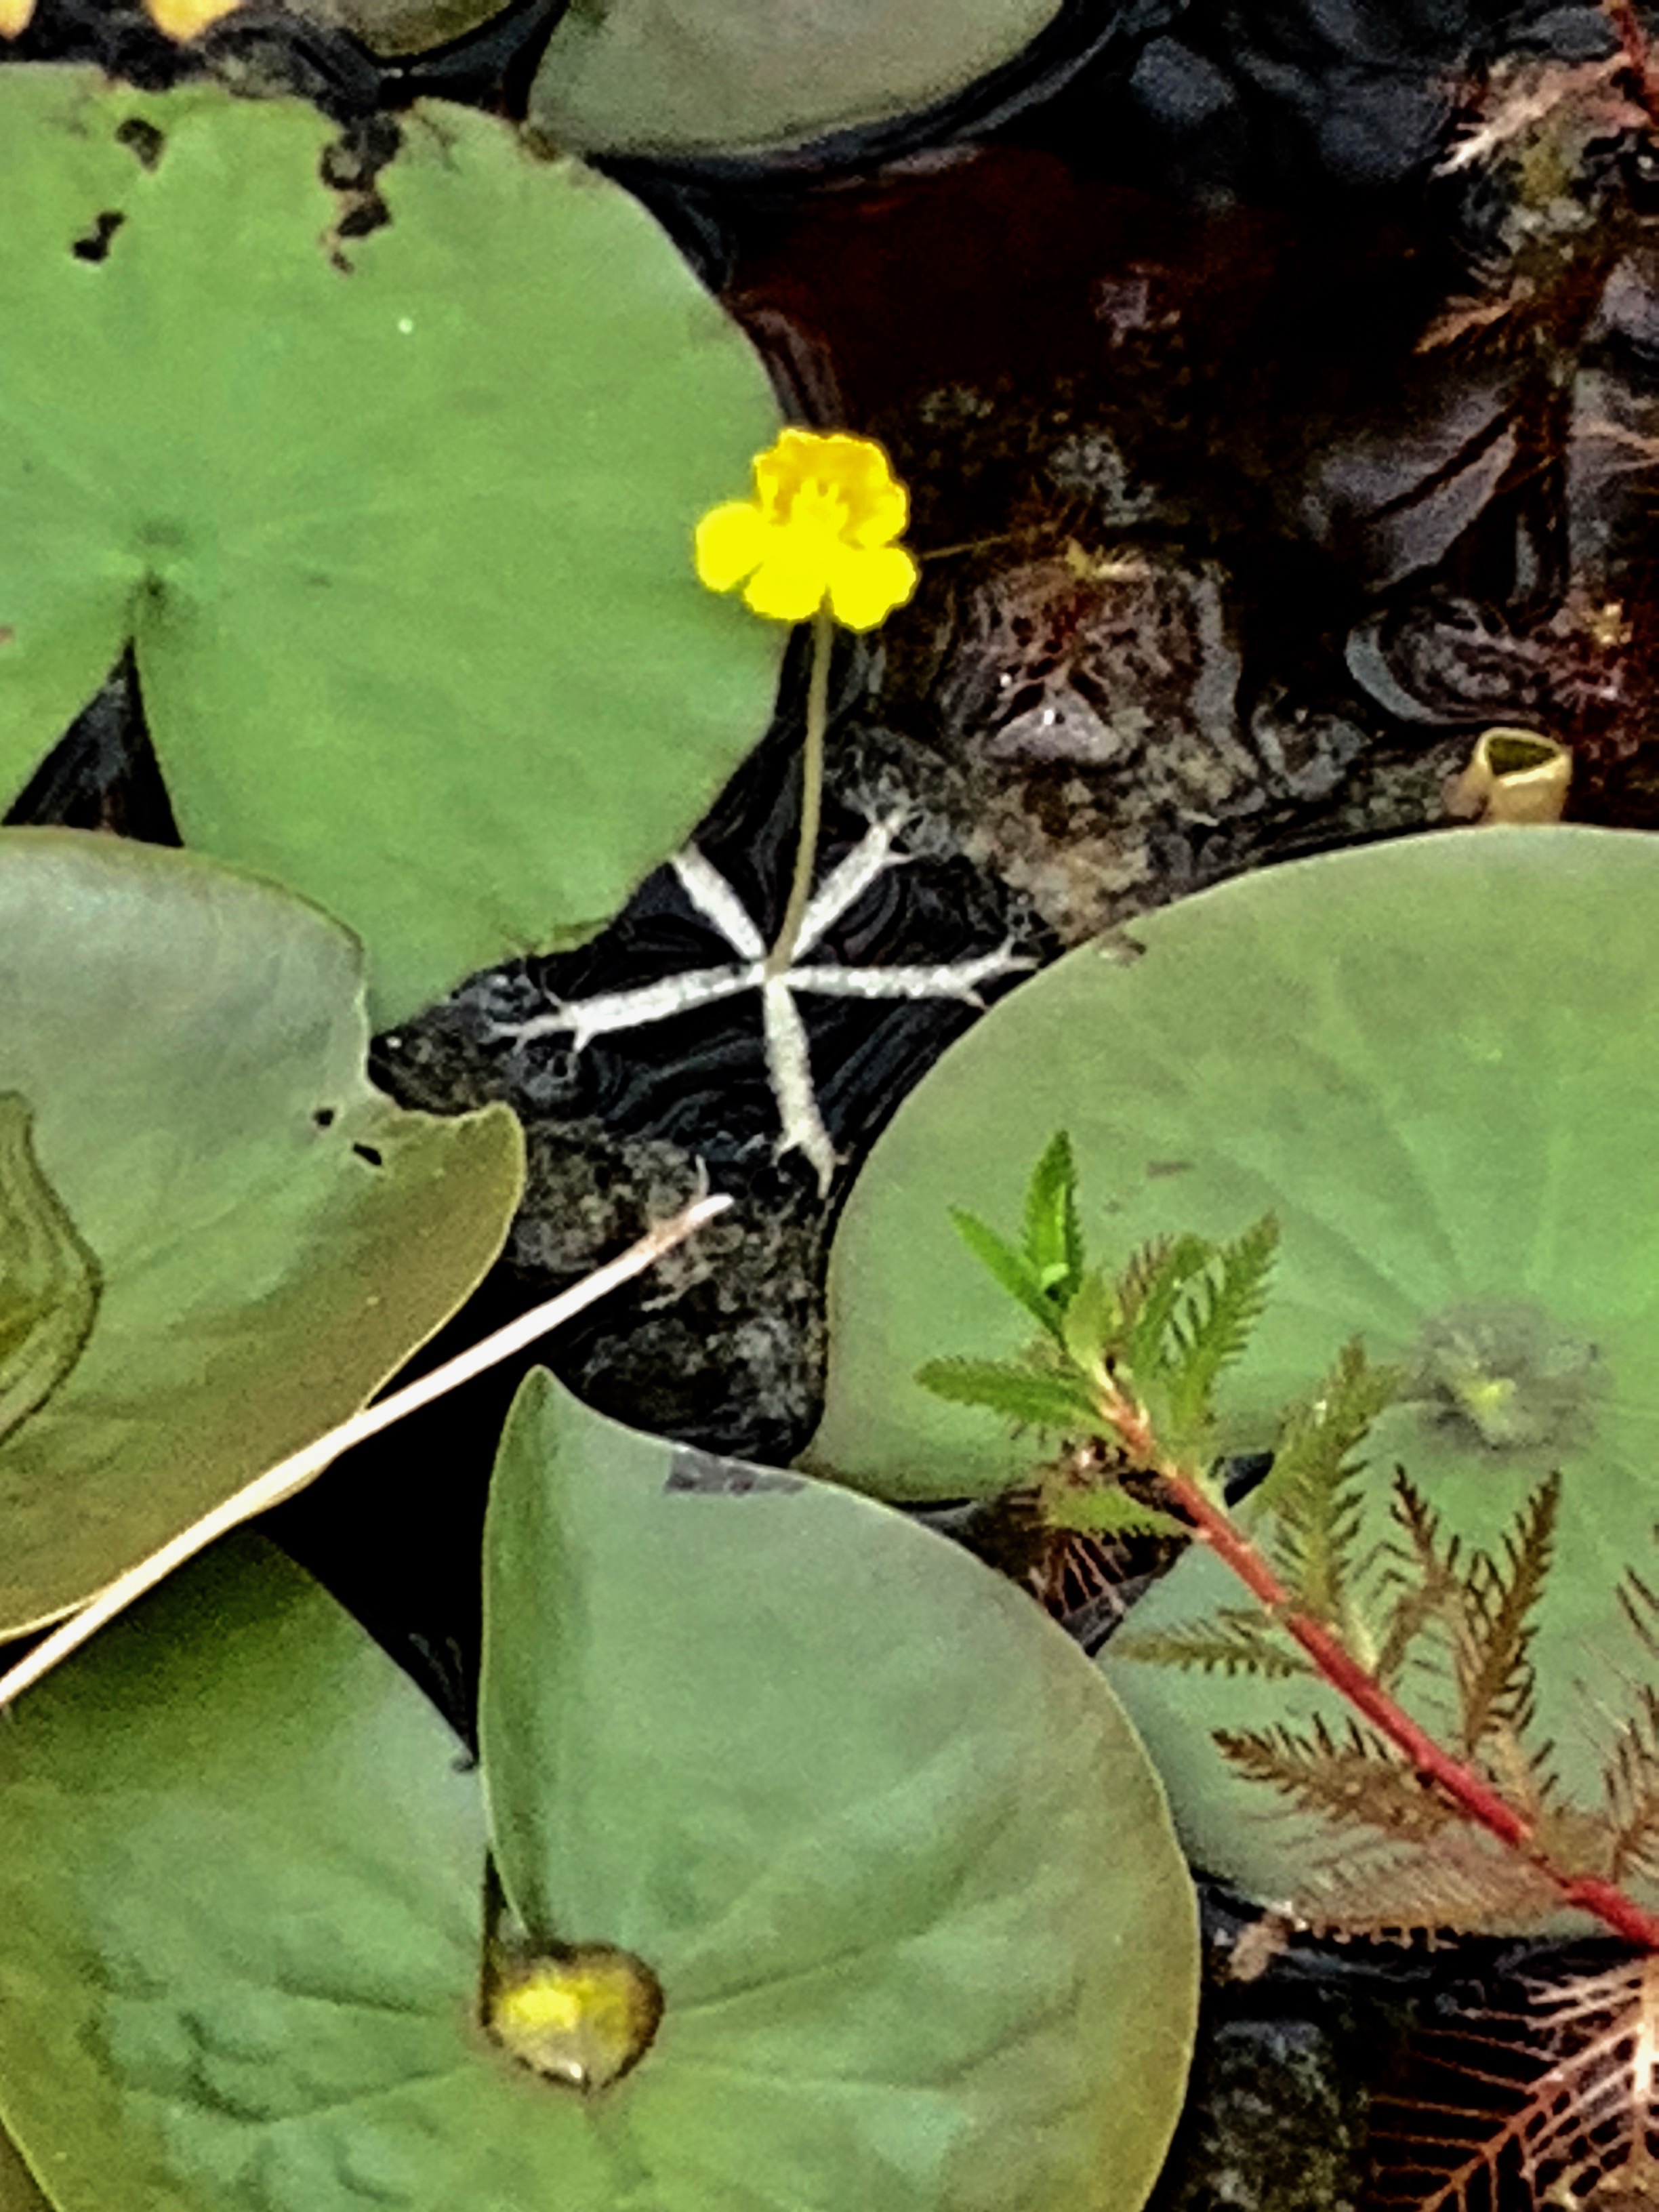 The Scientific Name is Utricularia radiata. You will likely hear them called Little Floating Bladderwort, Small Swollen Bladderwort. floating bladderwort. This picture shows the  of Utricularia radiata